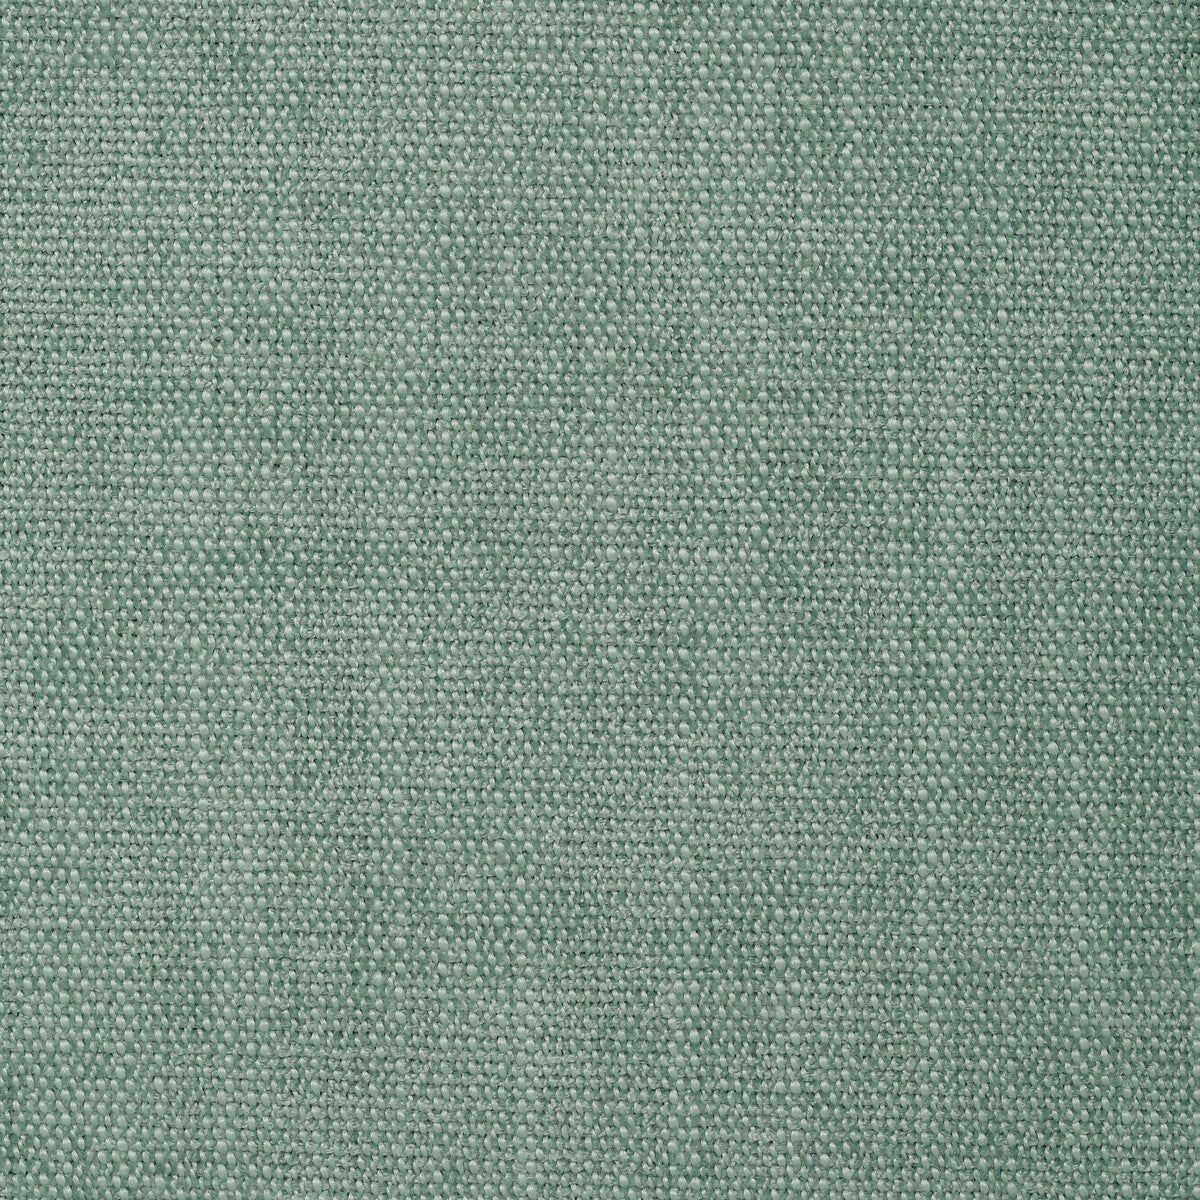 Kravet Smart fabric in 35113-135 color - pattern 35113.135.0 - by Kravet Smart in the Performance Crypton Home collection